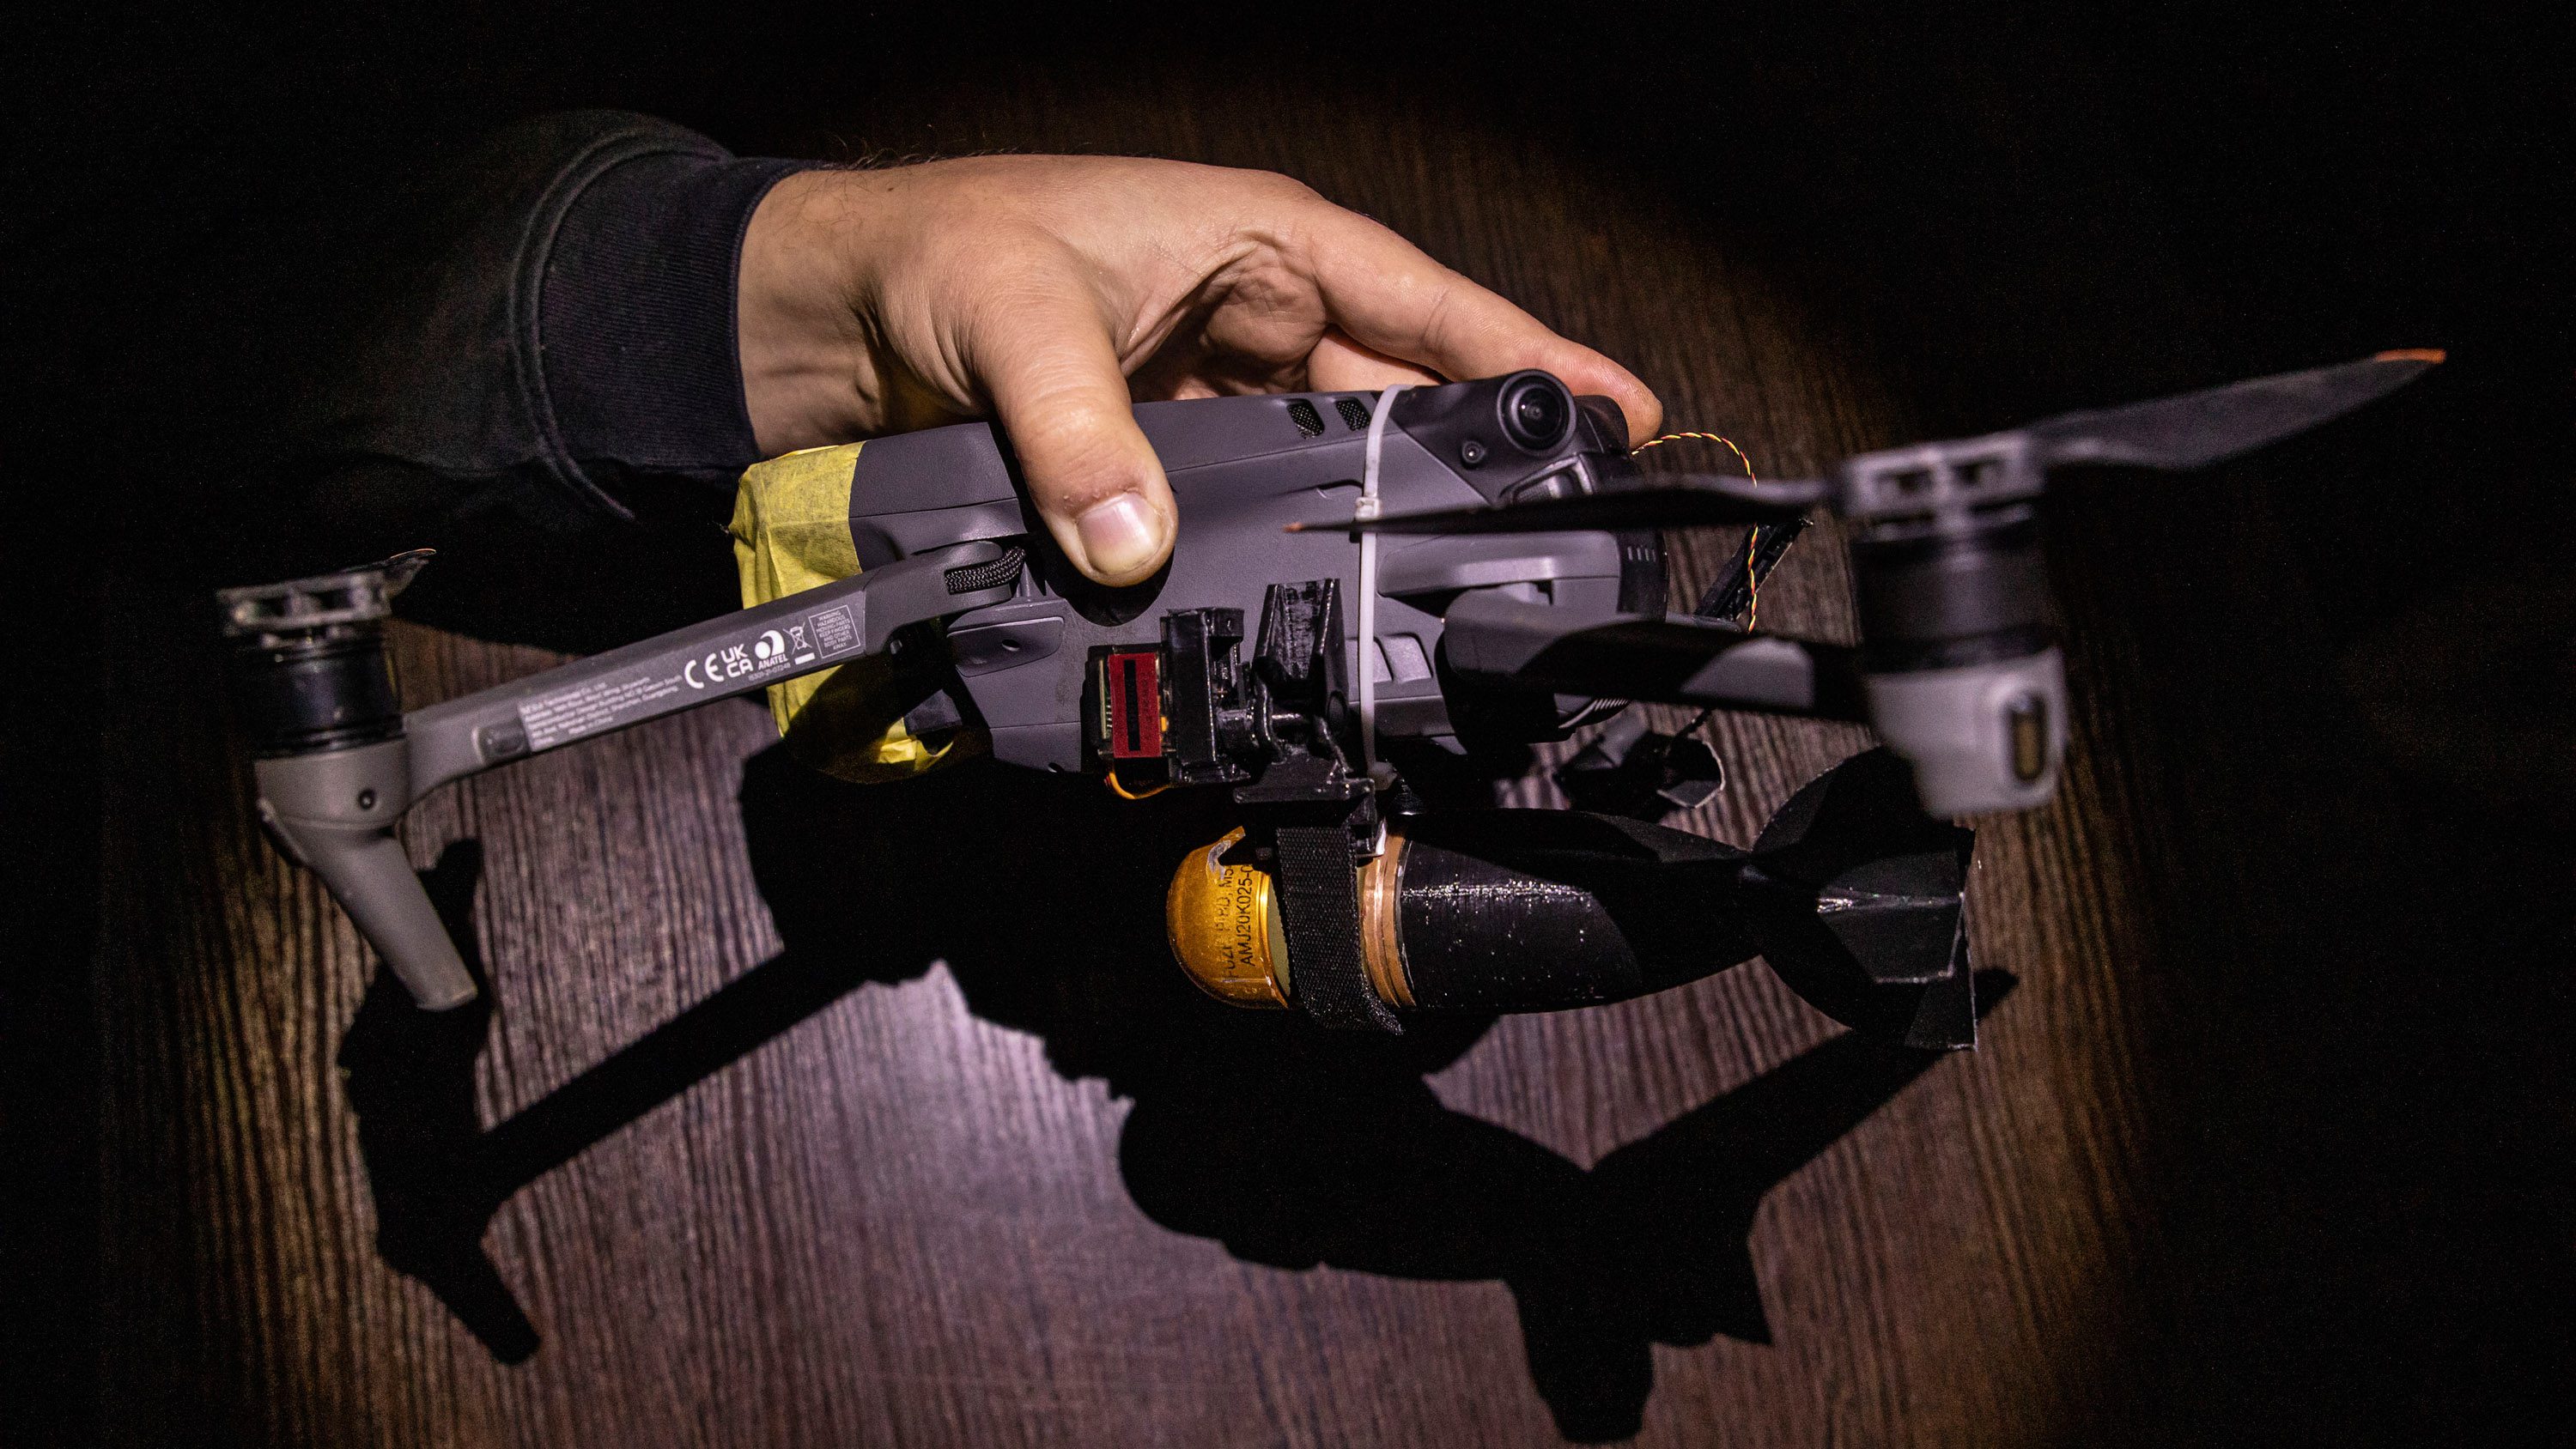 Hand holds a small quadcopter drone with a bomblet attached.